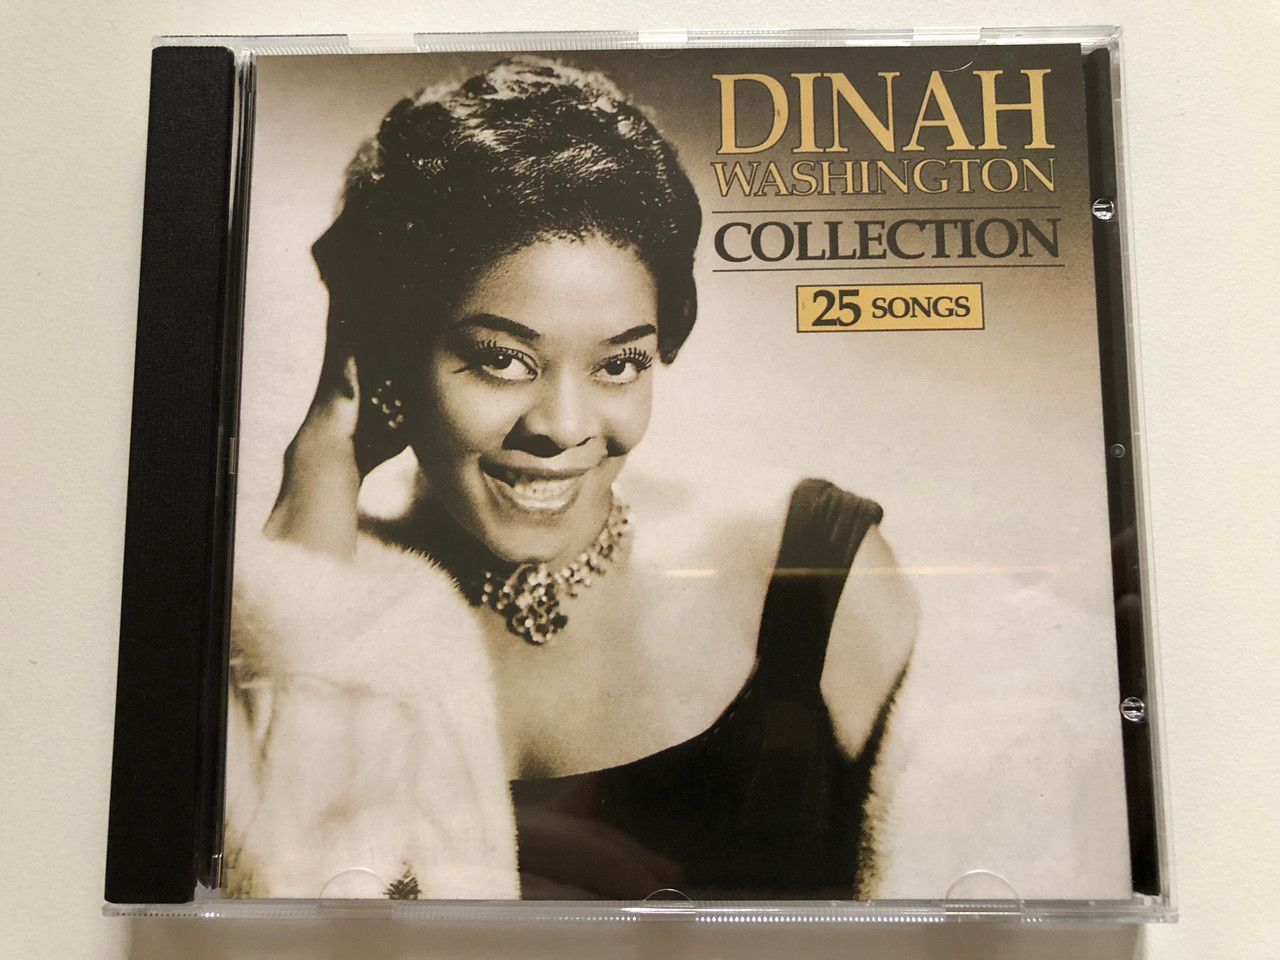 https://cdn10.bigcommerce.com/s-62bdpkt7pb/products/0/images/310587/Dinah_Washington_Collection_25_Songs_The_Collection_Audio_CD_1994_COL057_1__52410.1699391926.1280.1280.JPG?c=2